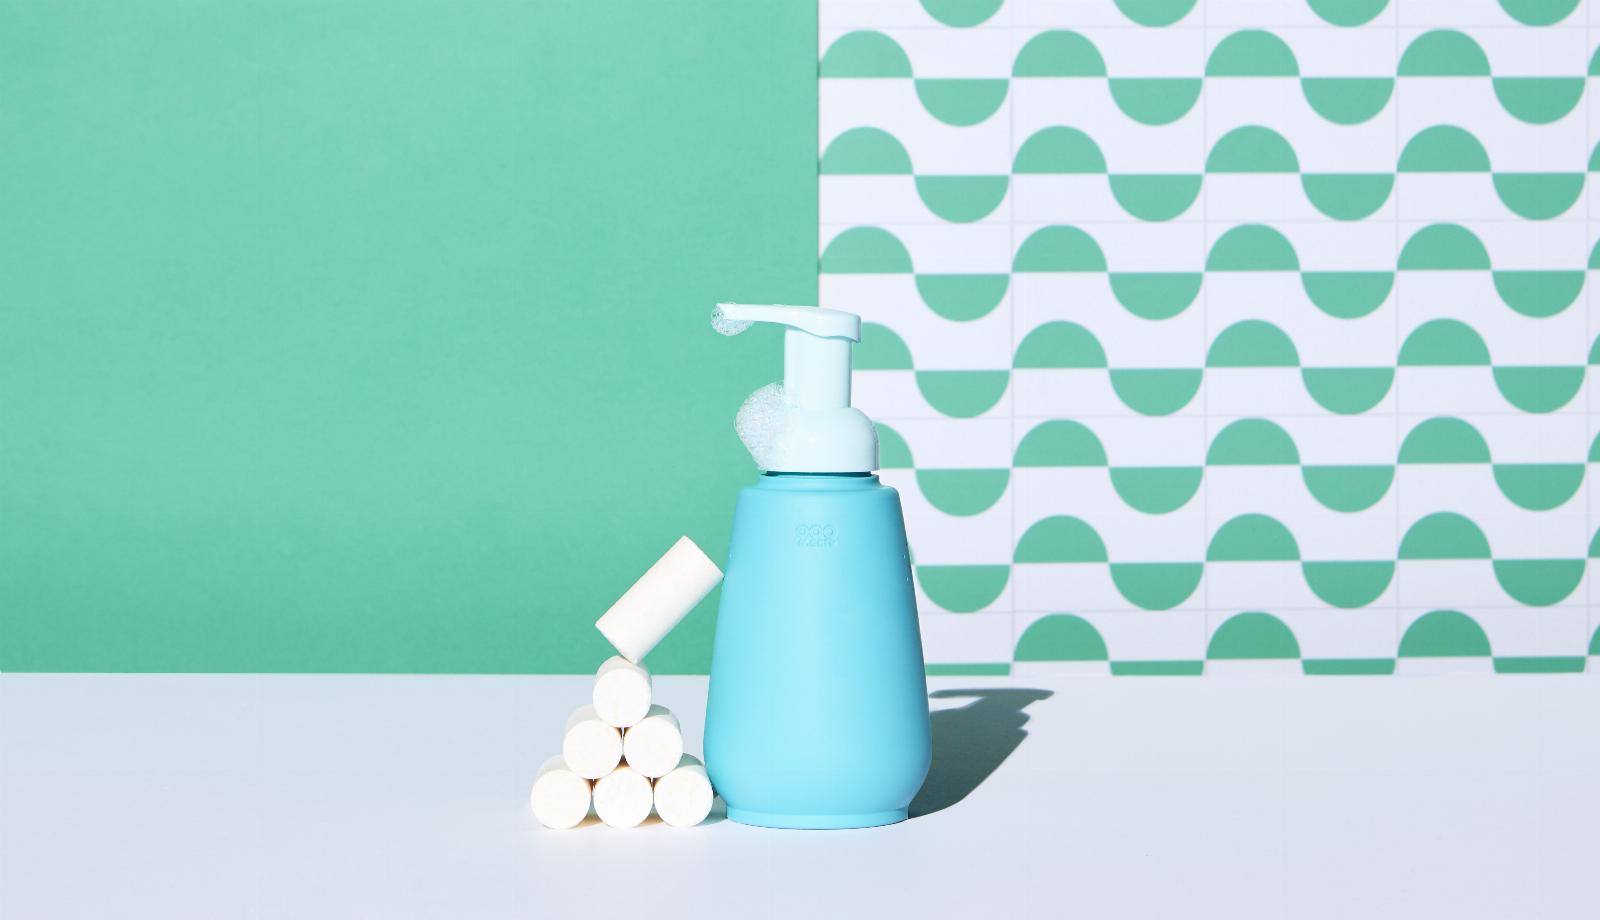 900.care sells waterless personal care products and lets you add tap water at home